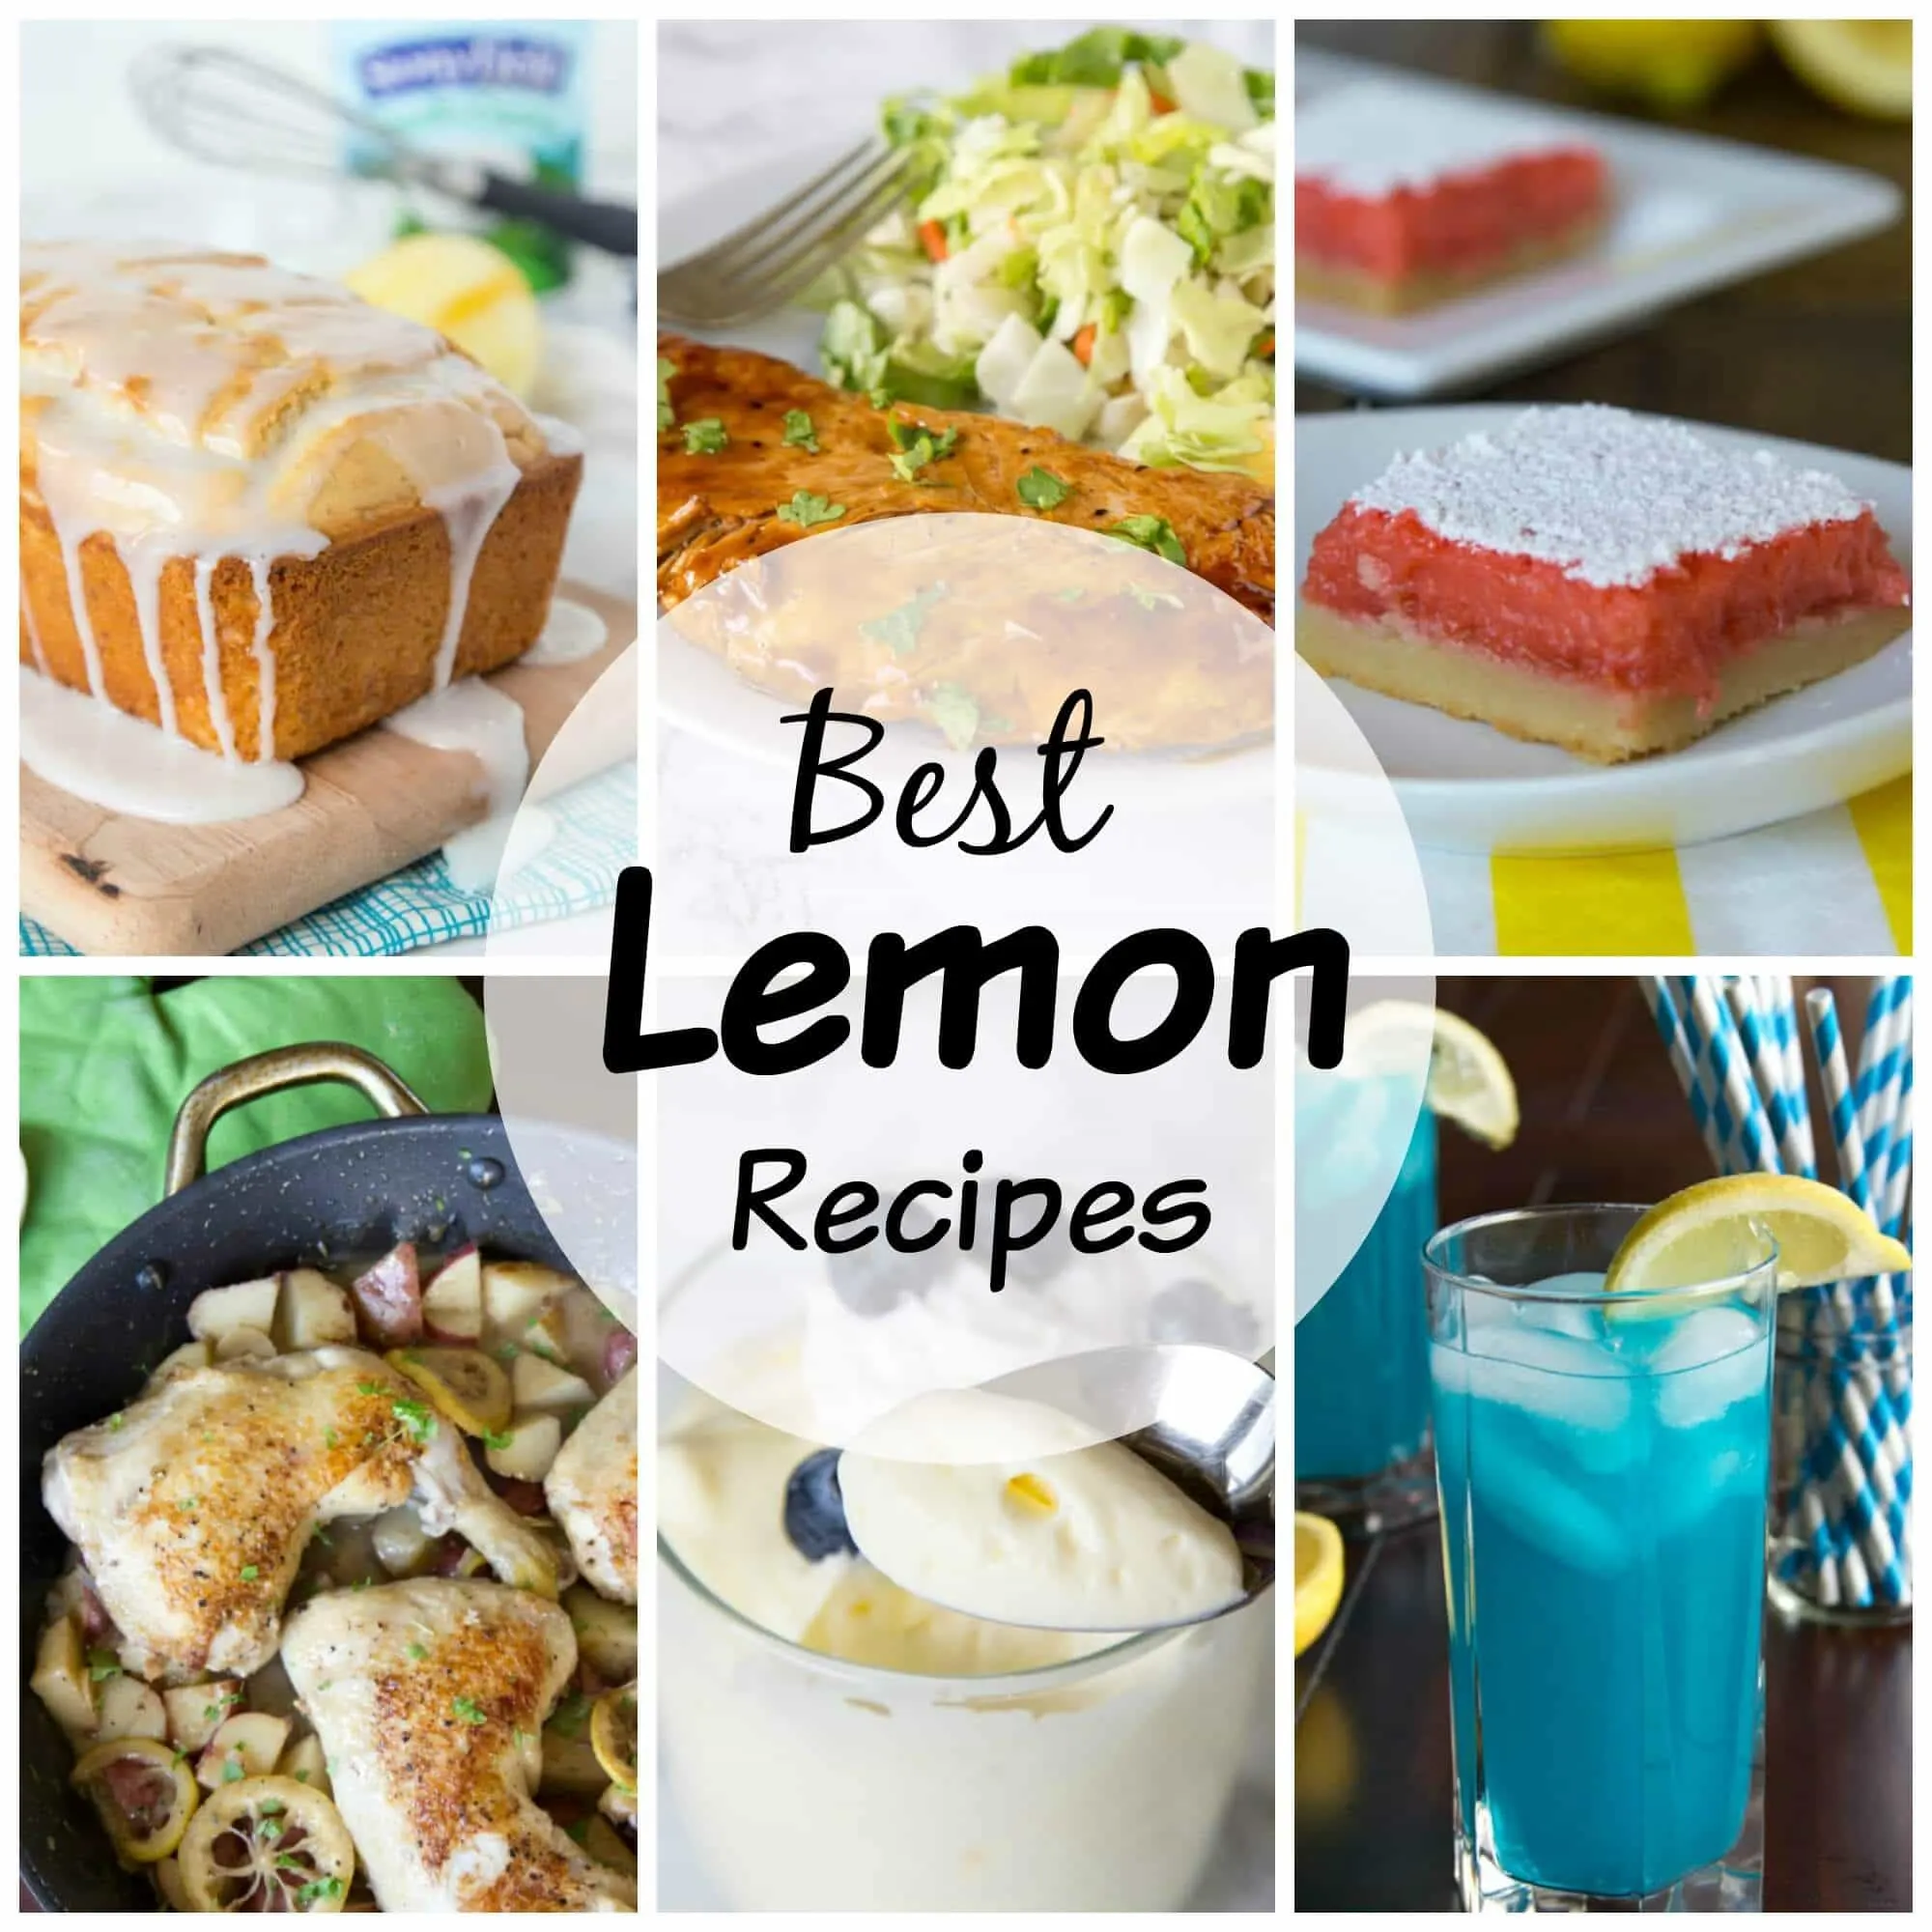 20 Lemon Recipes - pucker up it is citrus season! Here are 20 of my favorite lemon recipes; everything from dinner to drinks to desserts!